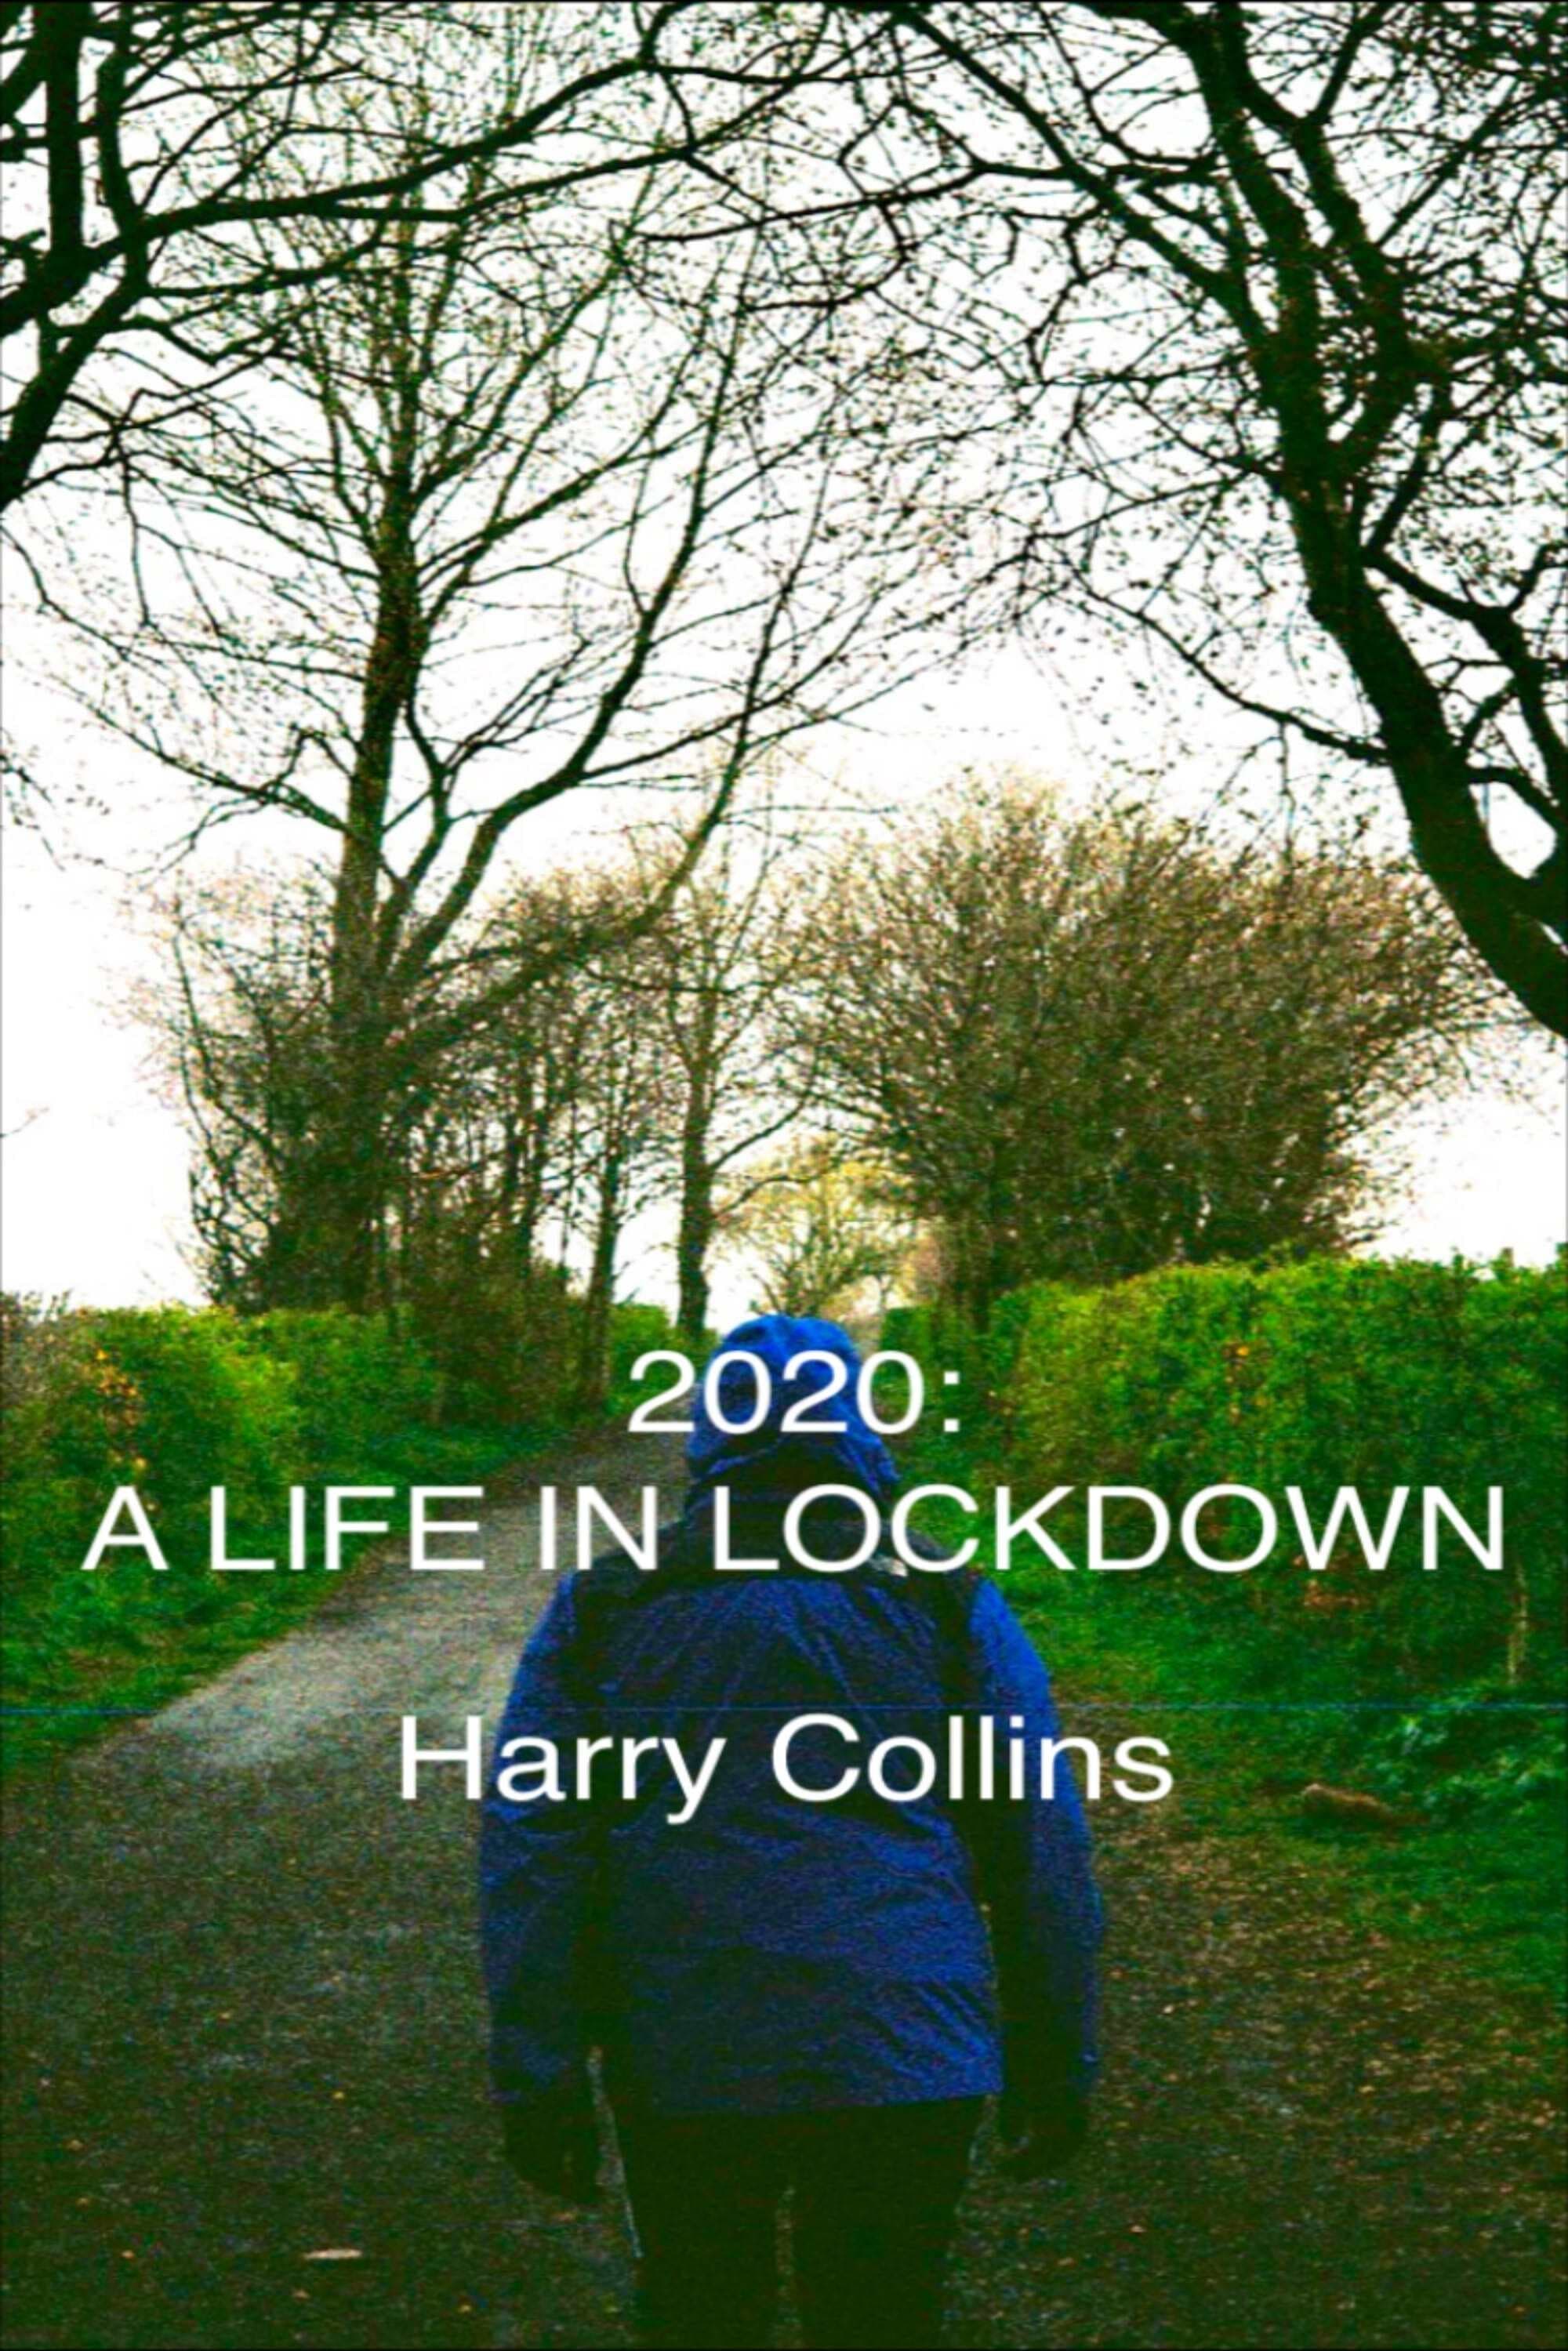 2020: A LIFE IN LOCKDOWN